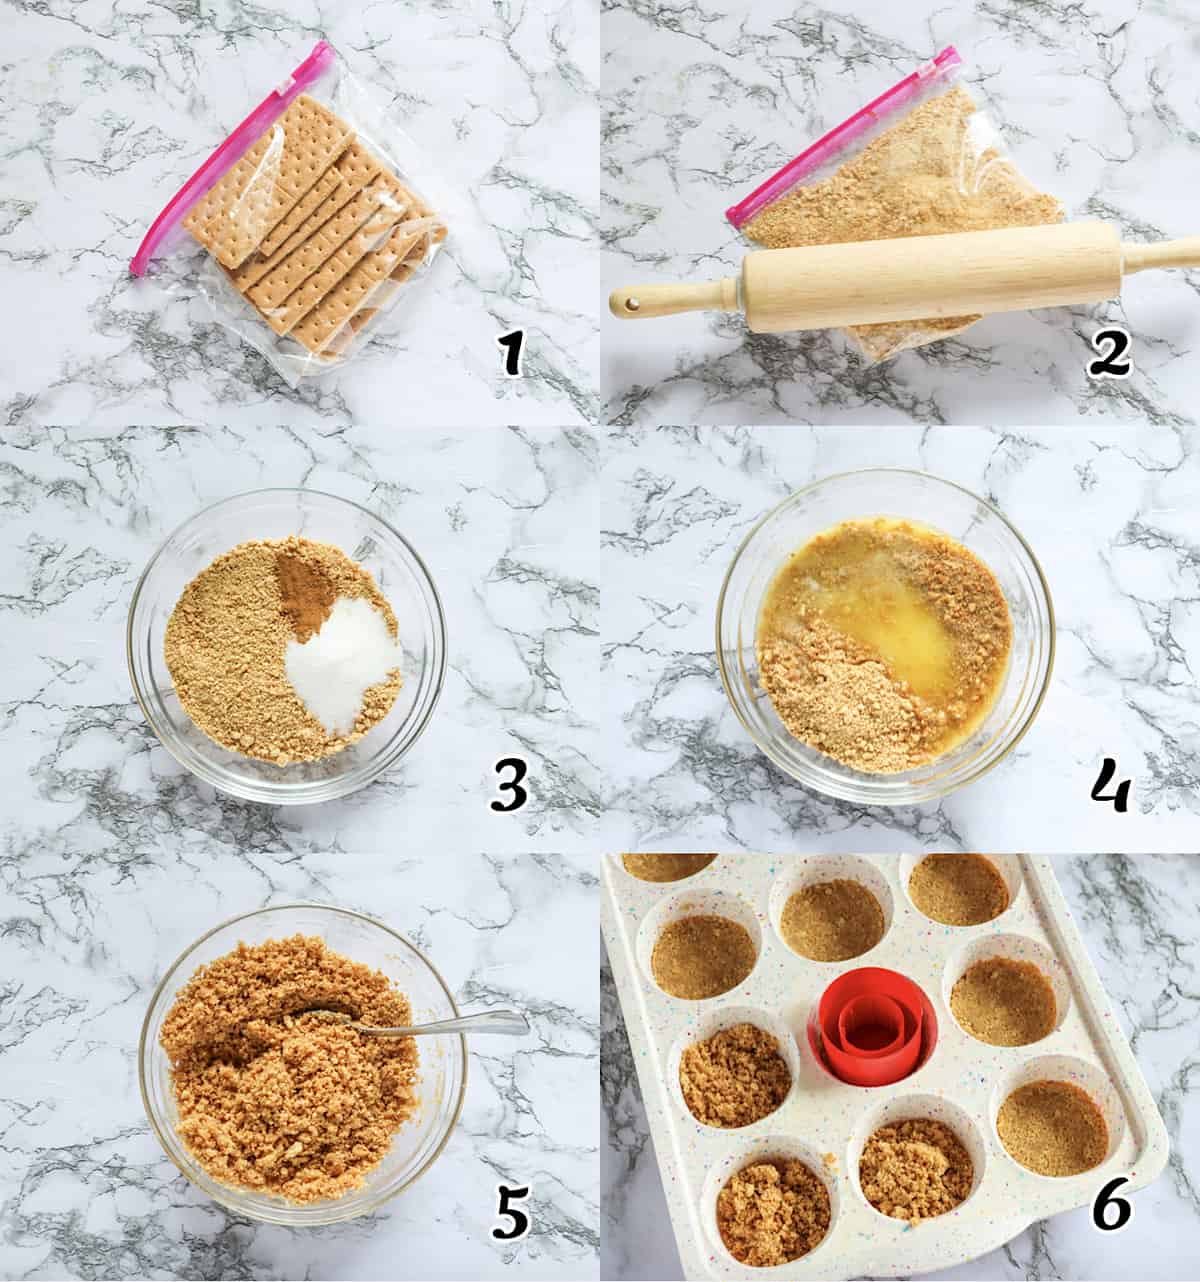 Crush the graham crackers to form a dough.